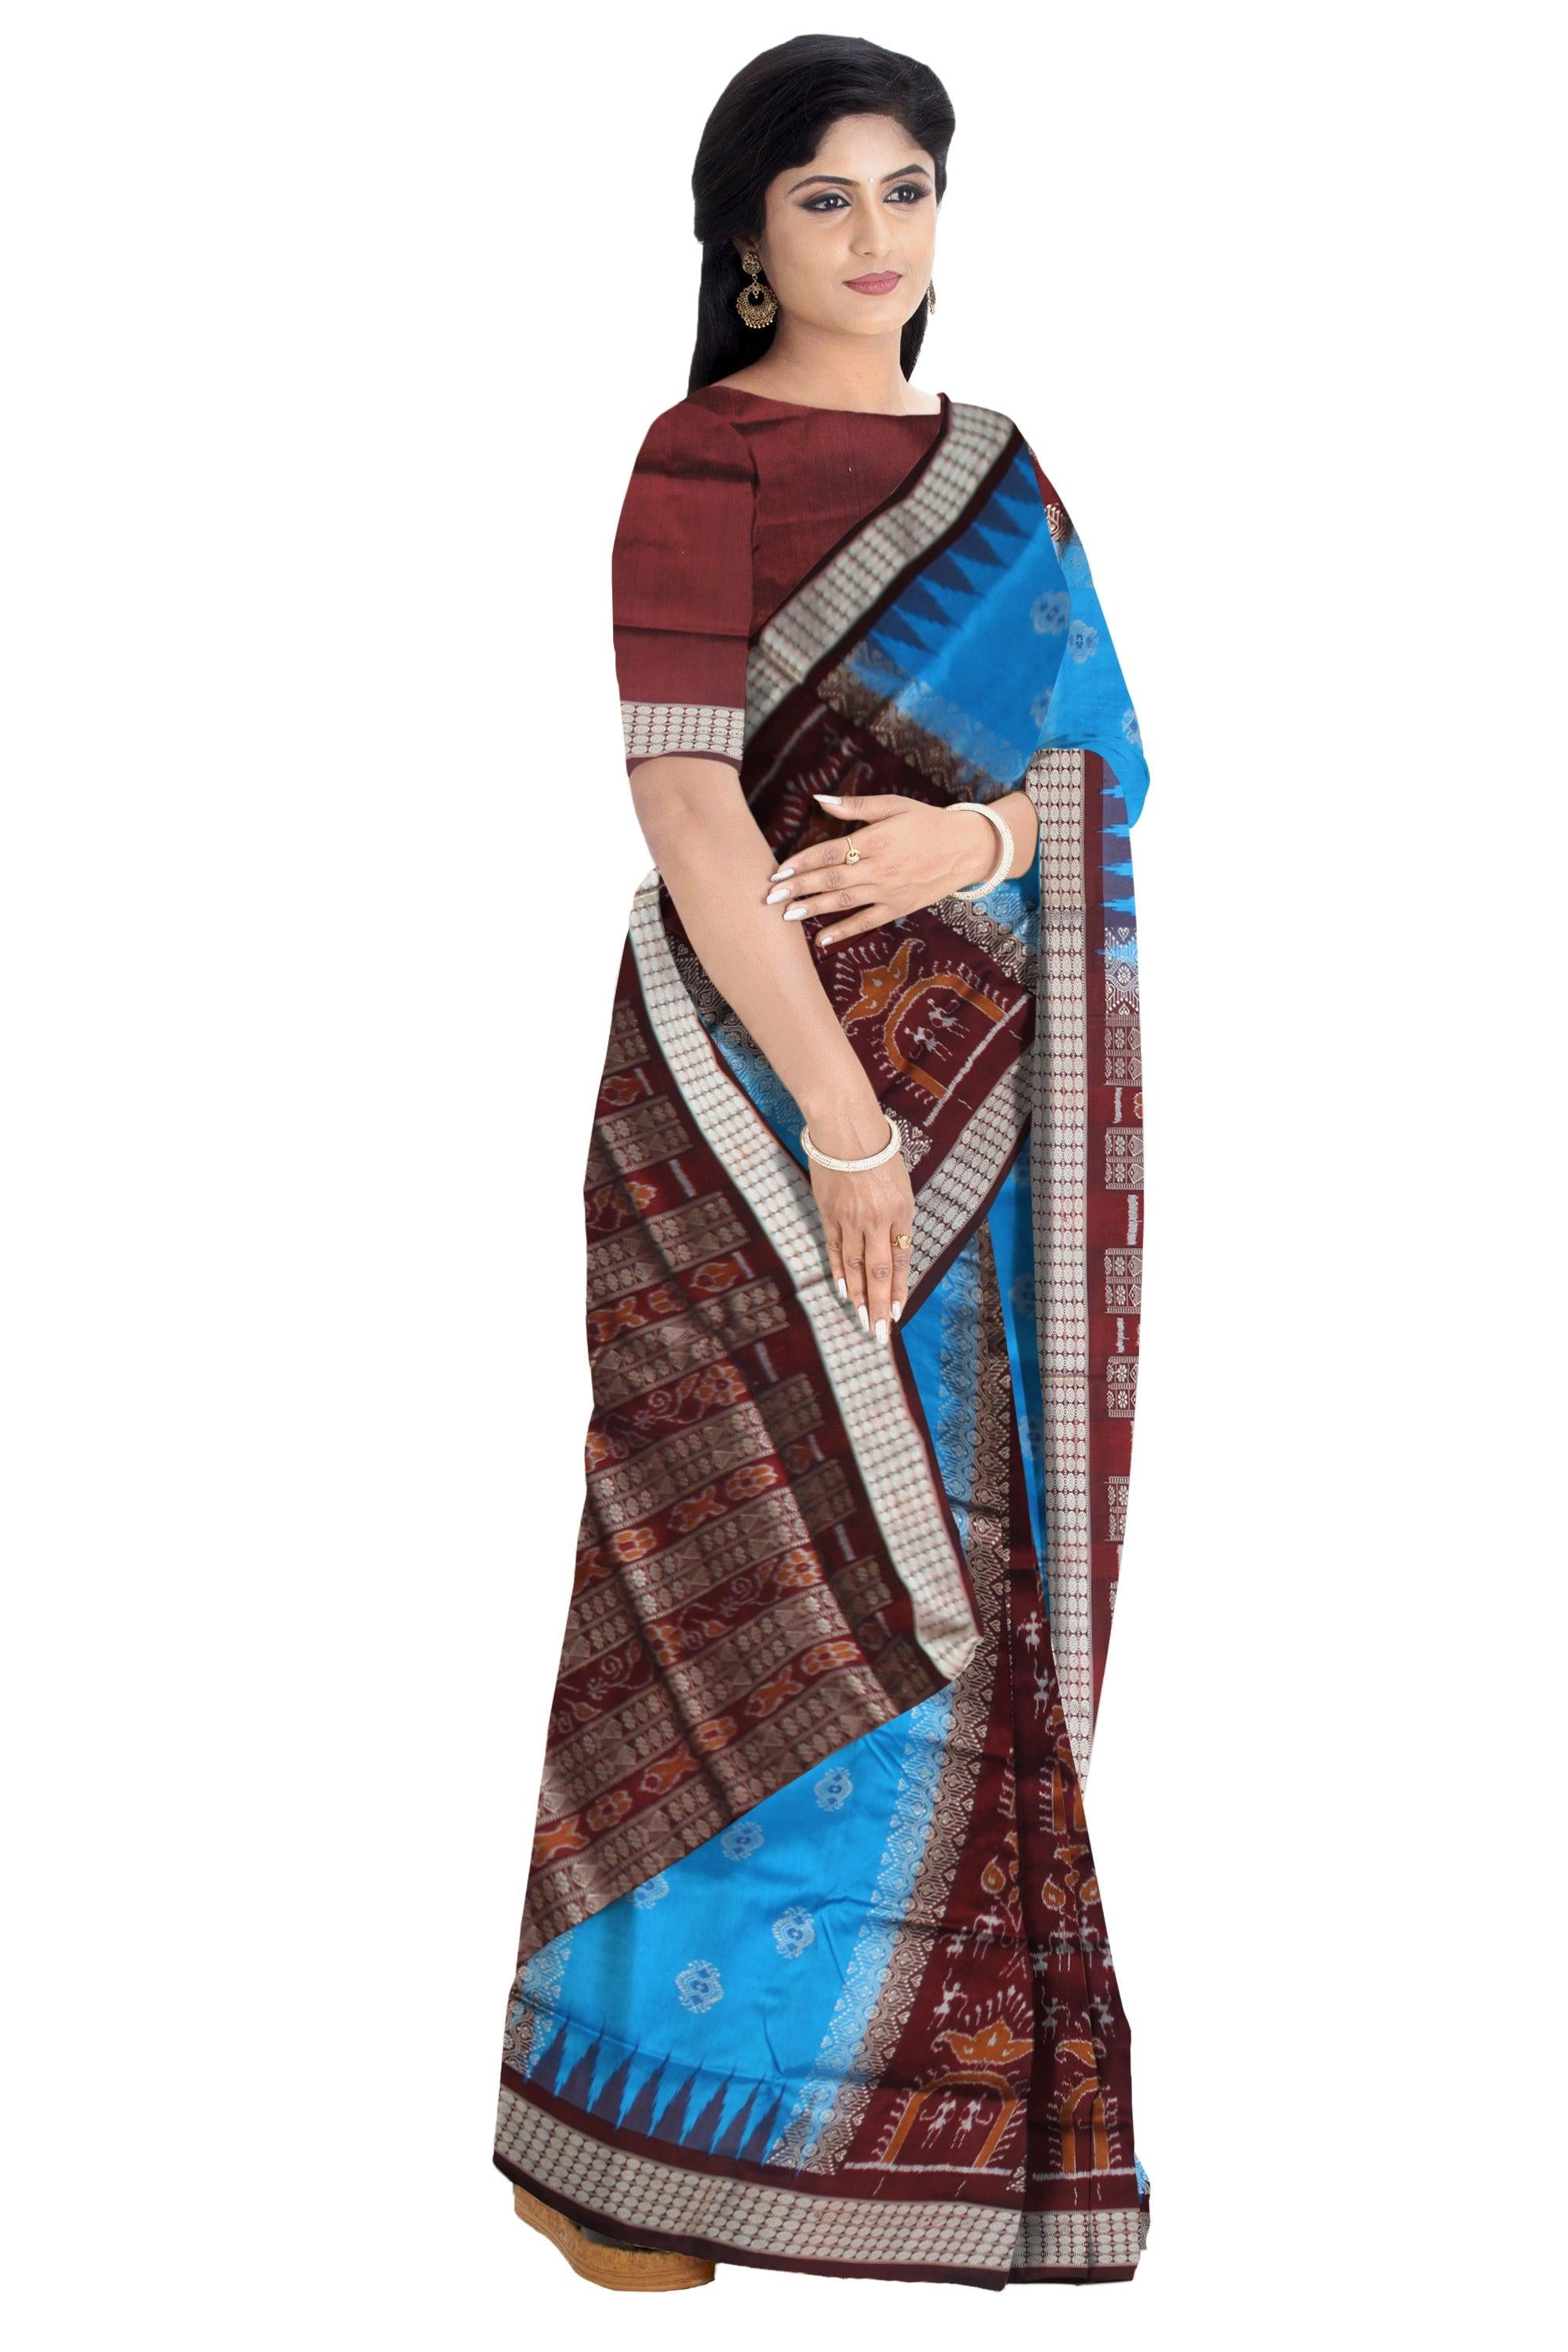 TERRACOTTA WITH BOMKEI PATTERN NEW COLLECTION  PURE SILK SAREE IS SKY AND COFFEE COLOR BASE, COMES WITH MATCHNG BLOUSE PIECE. - Koshali Arts & Crafts Enterprise